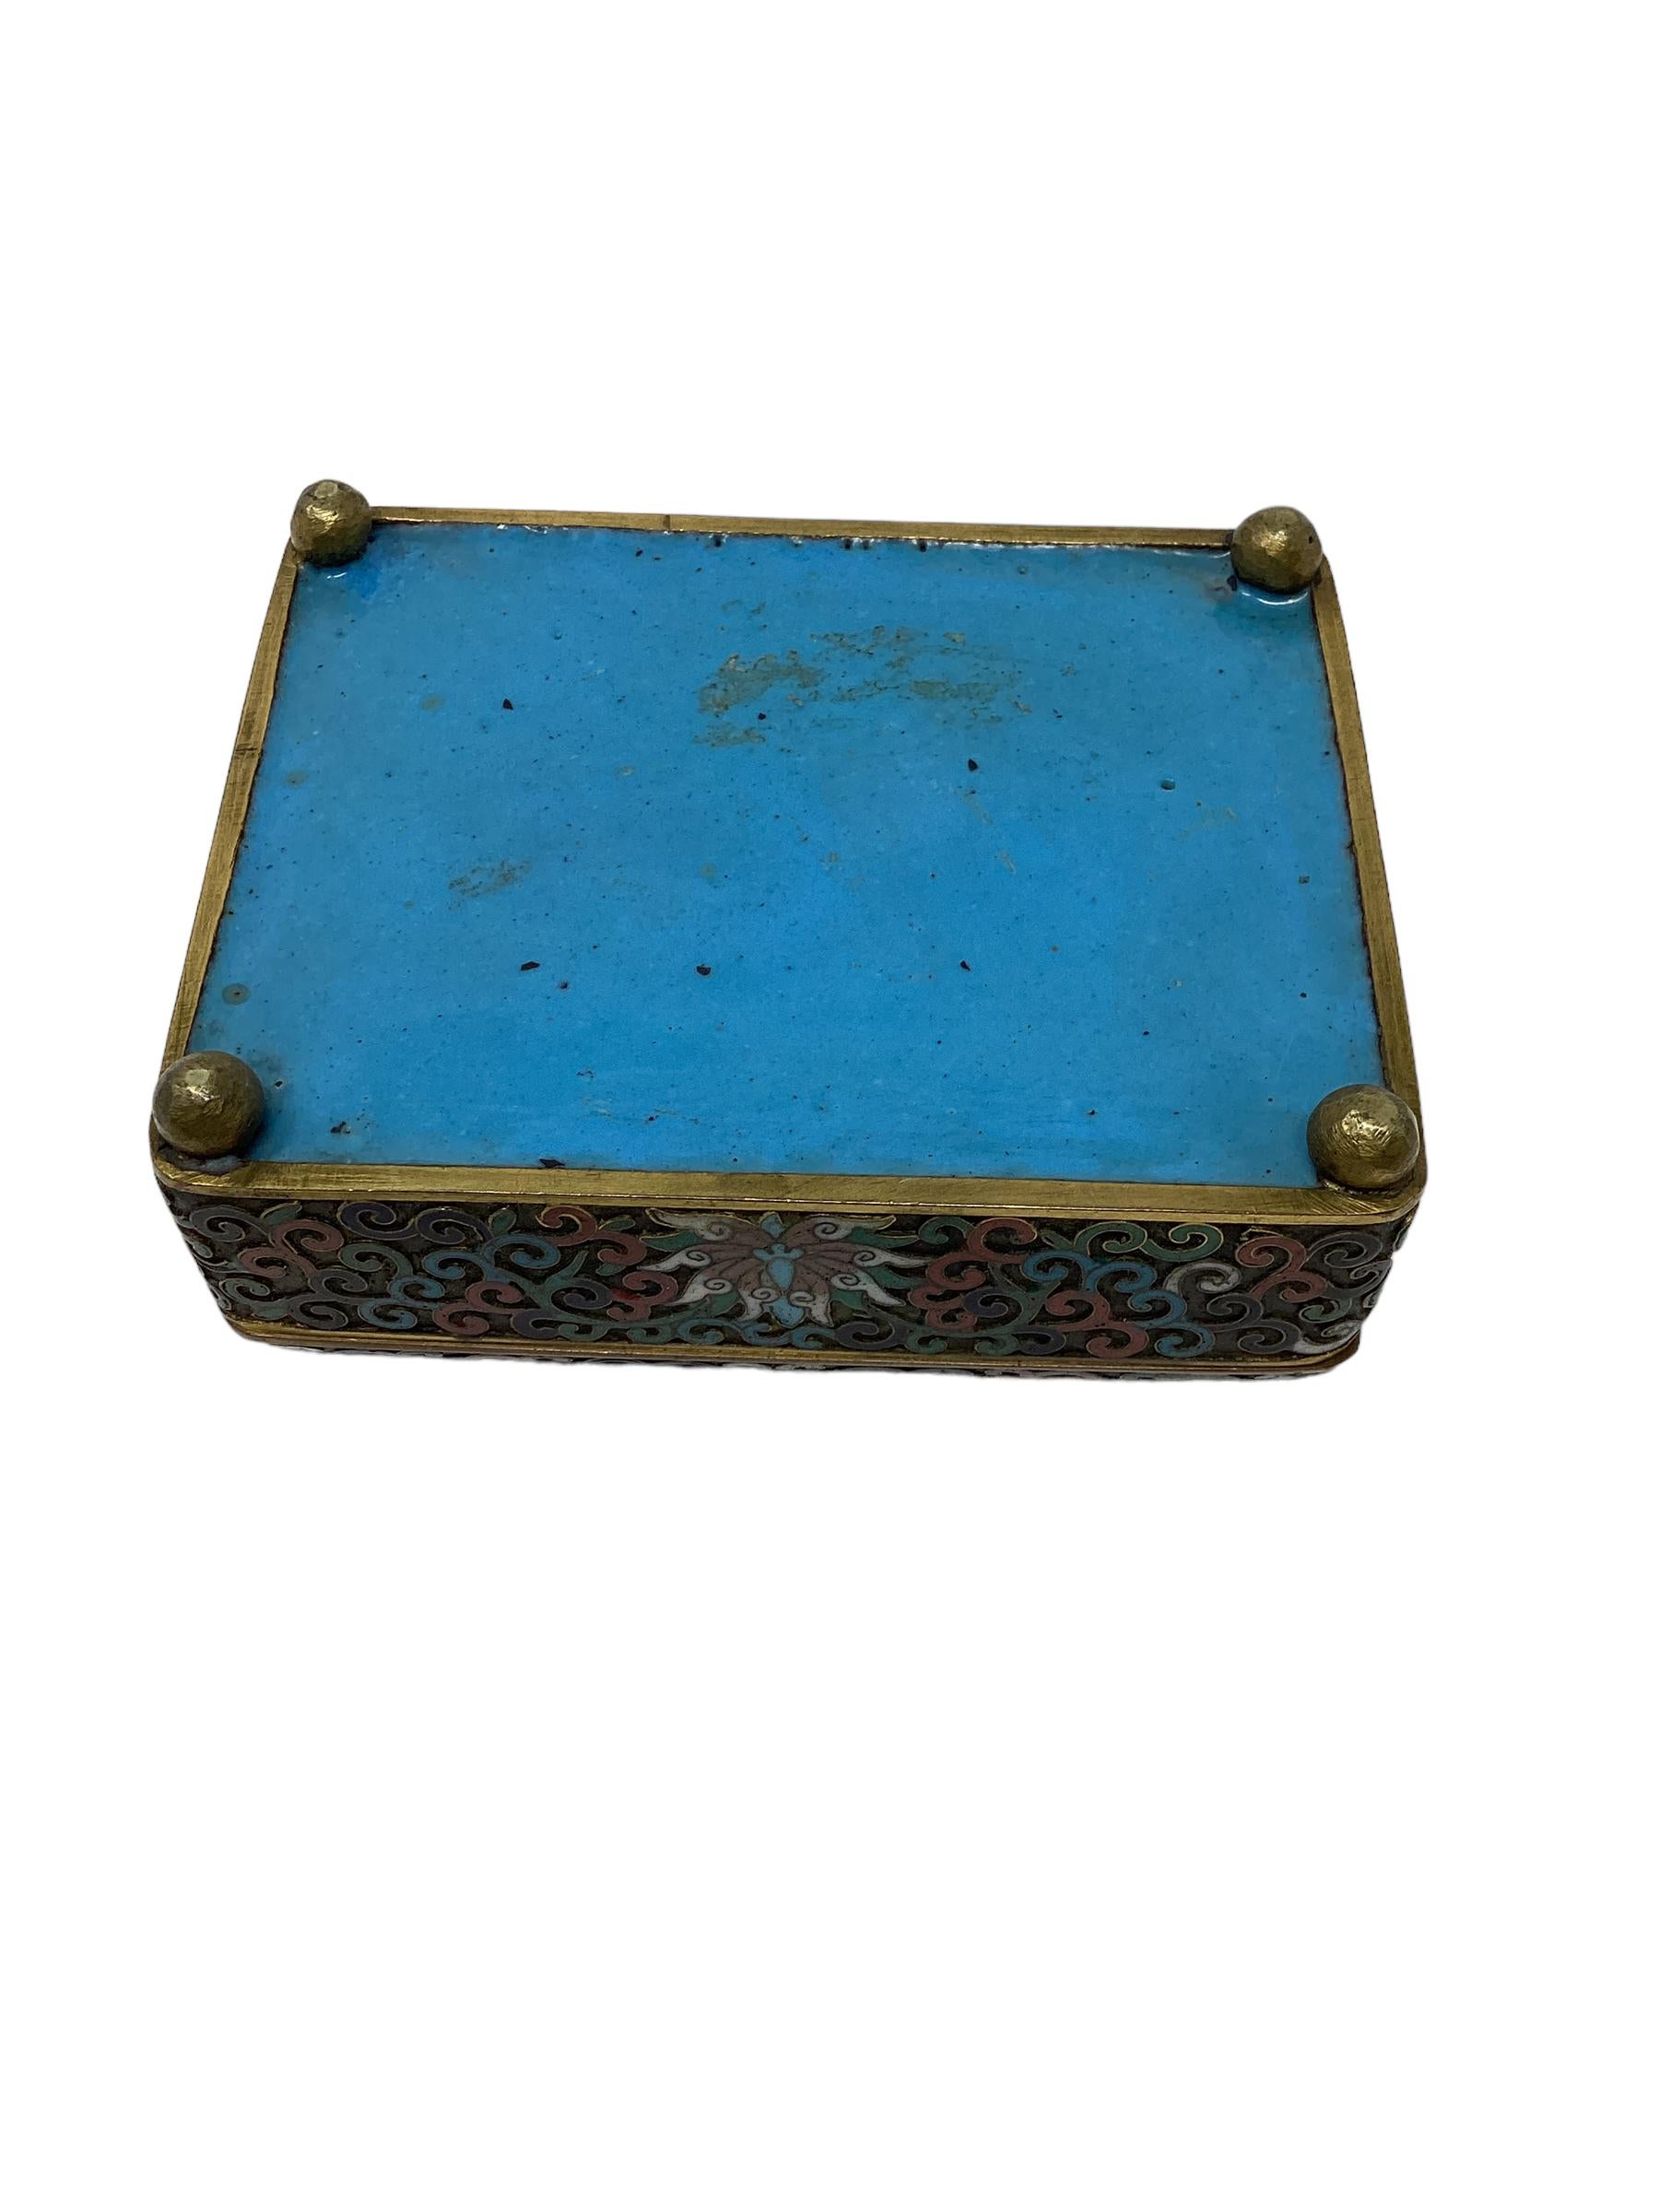 Chinese Export Cloisonné Box For Sale 1